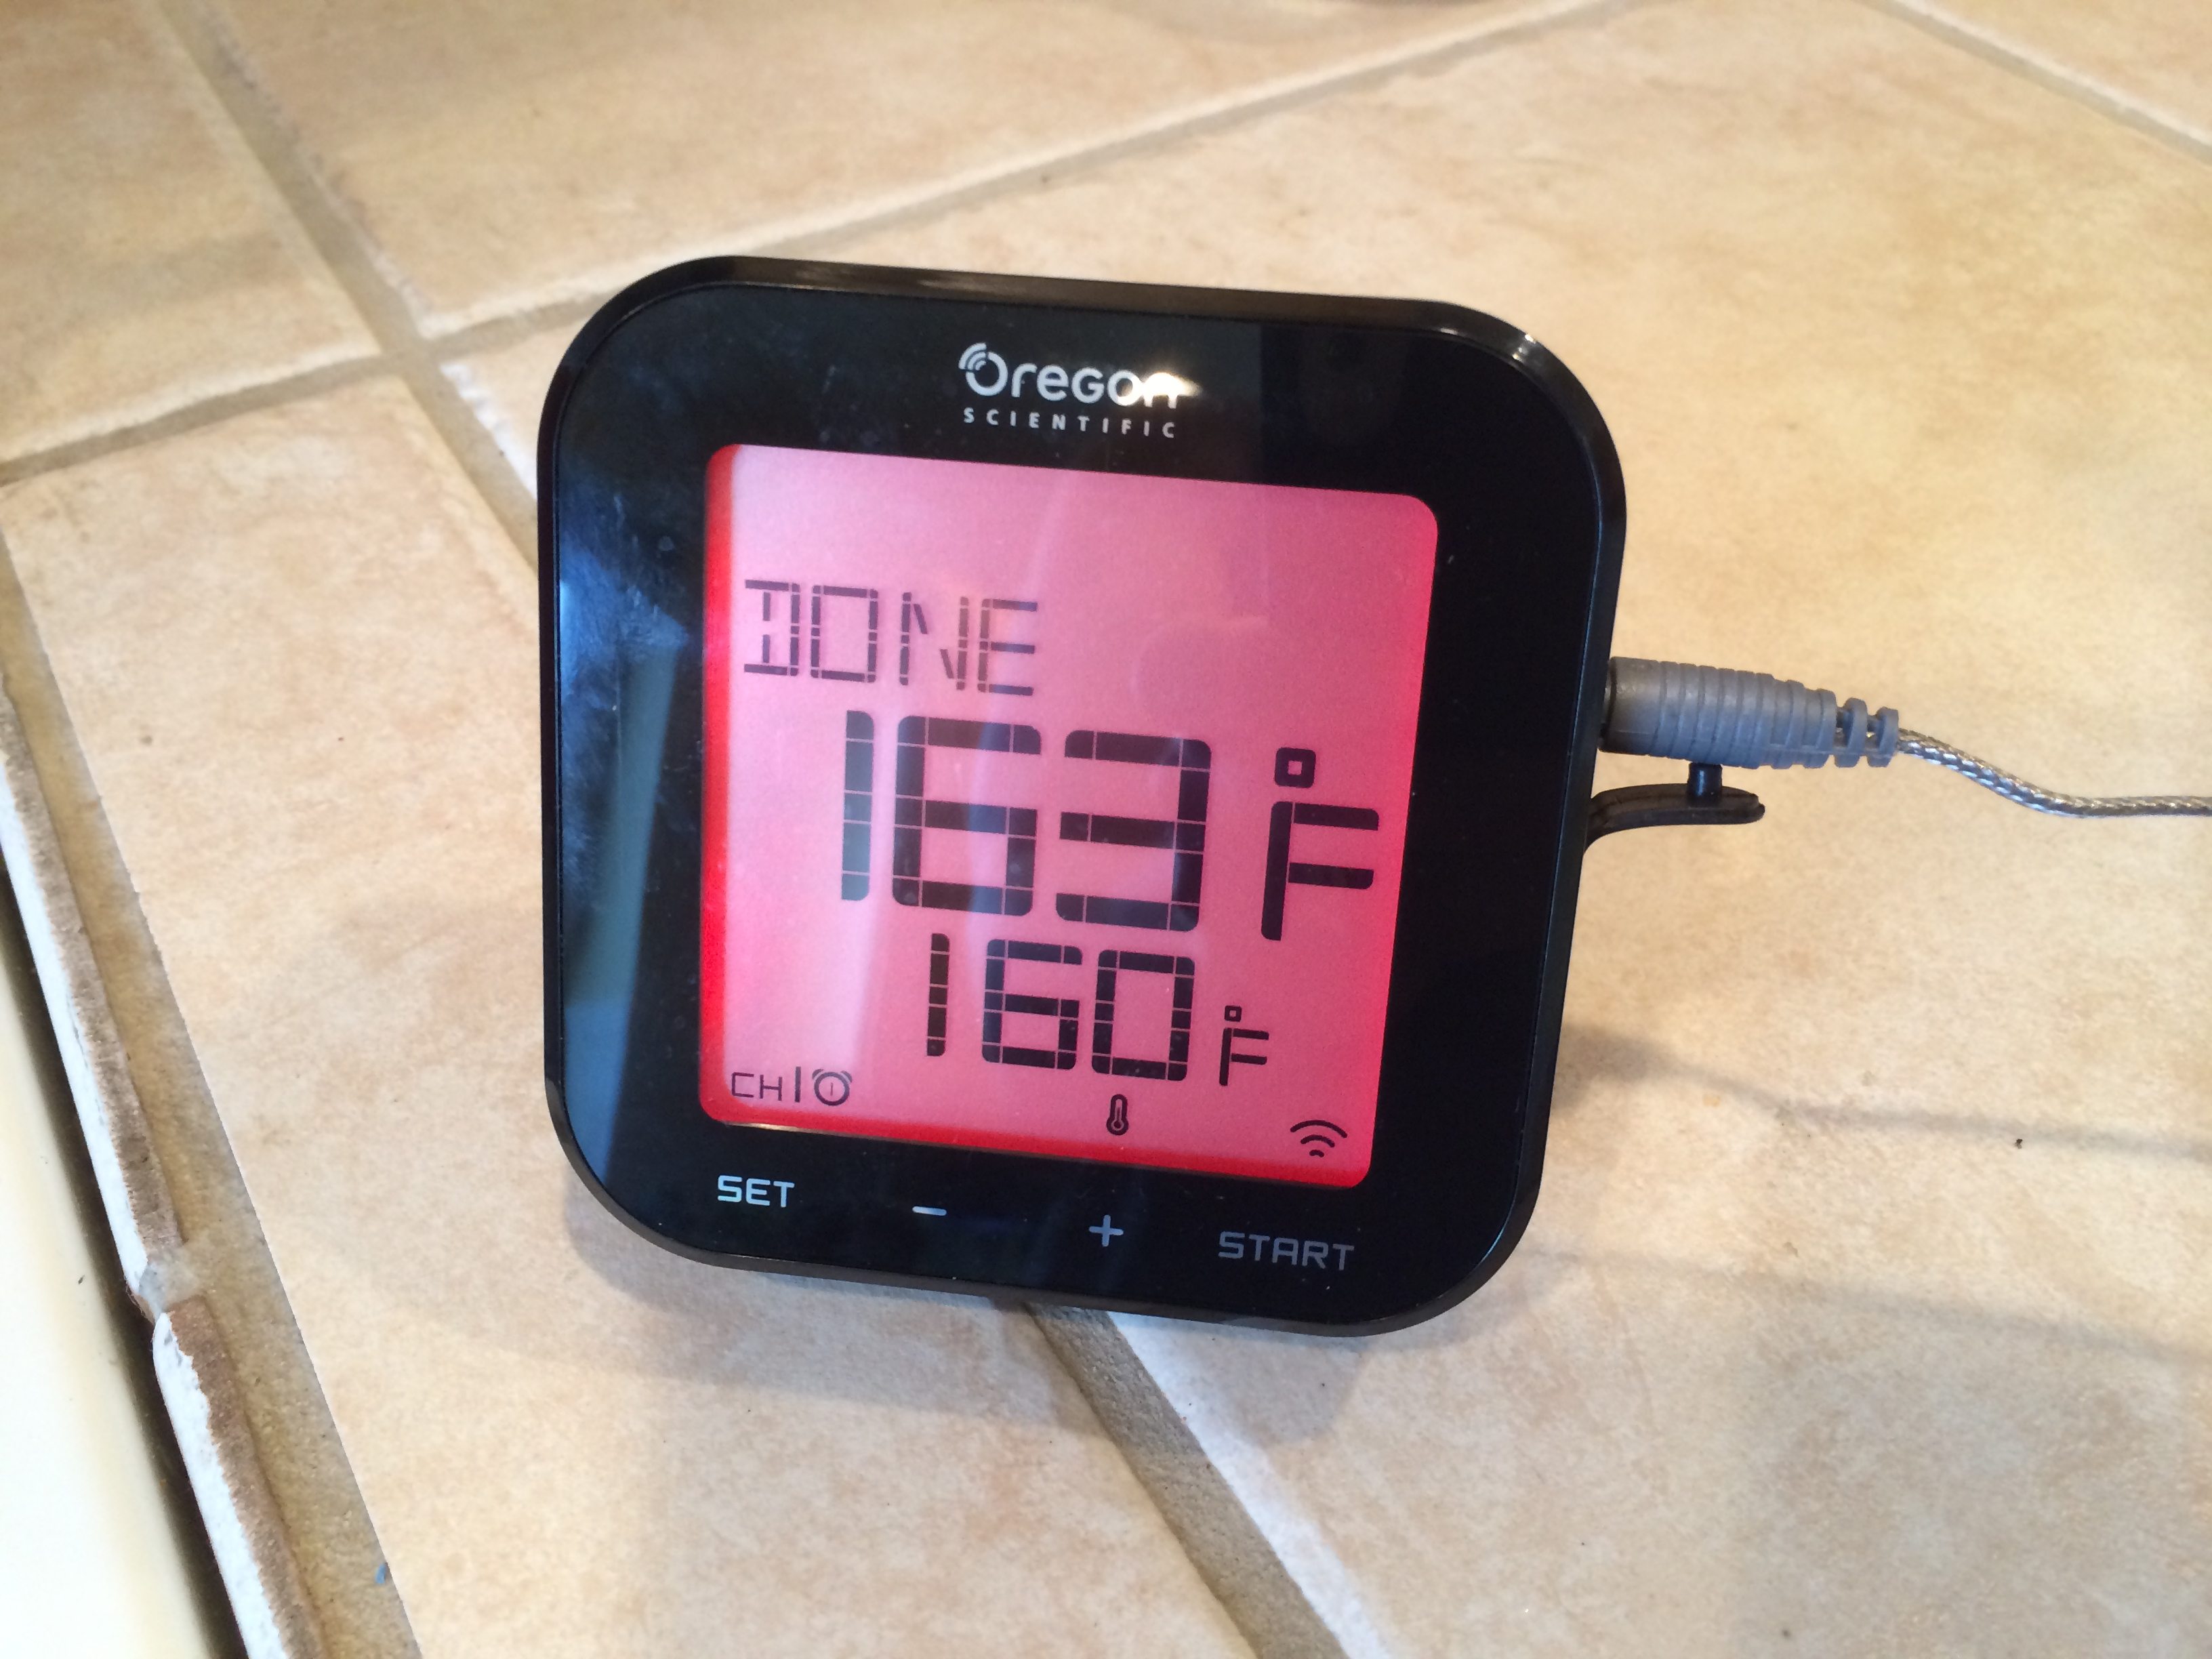 Review: Oregon Scientific Weather@Home Bluetooth-Enabled Weather Station